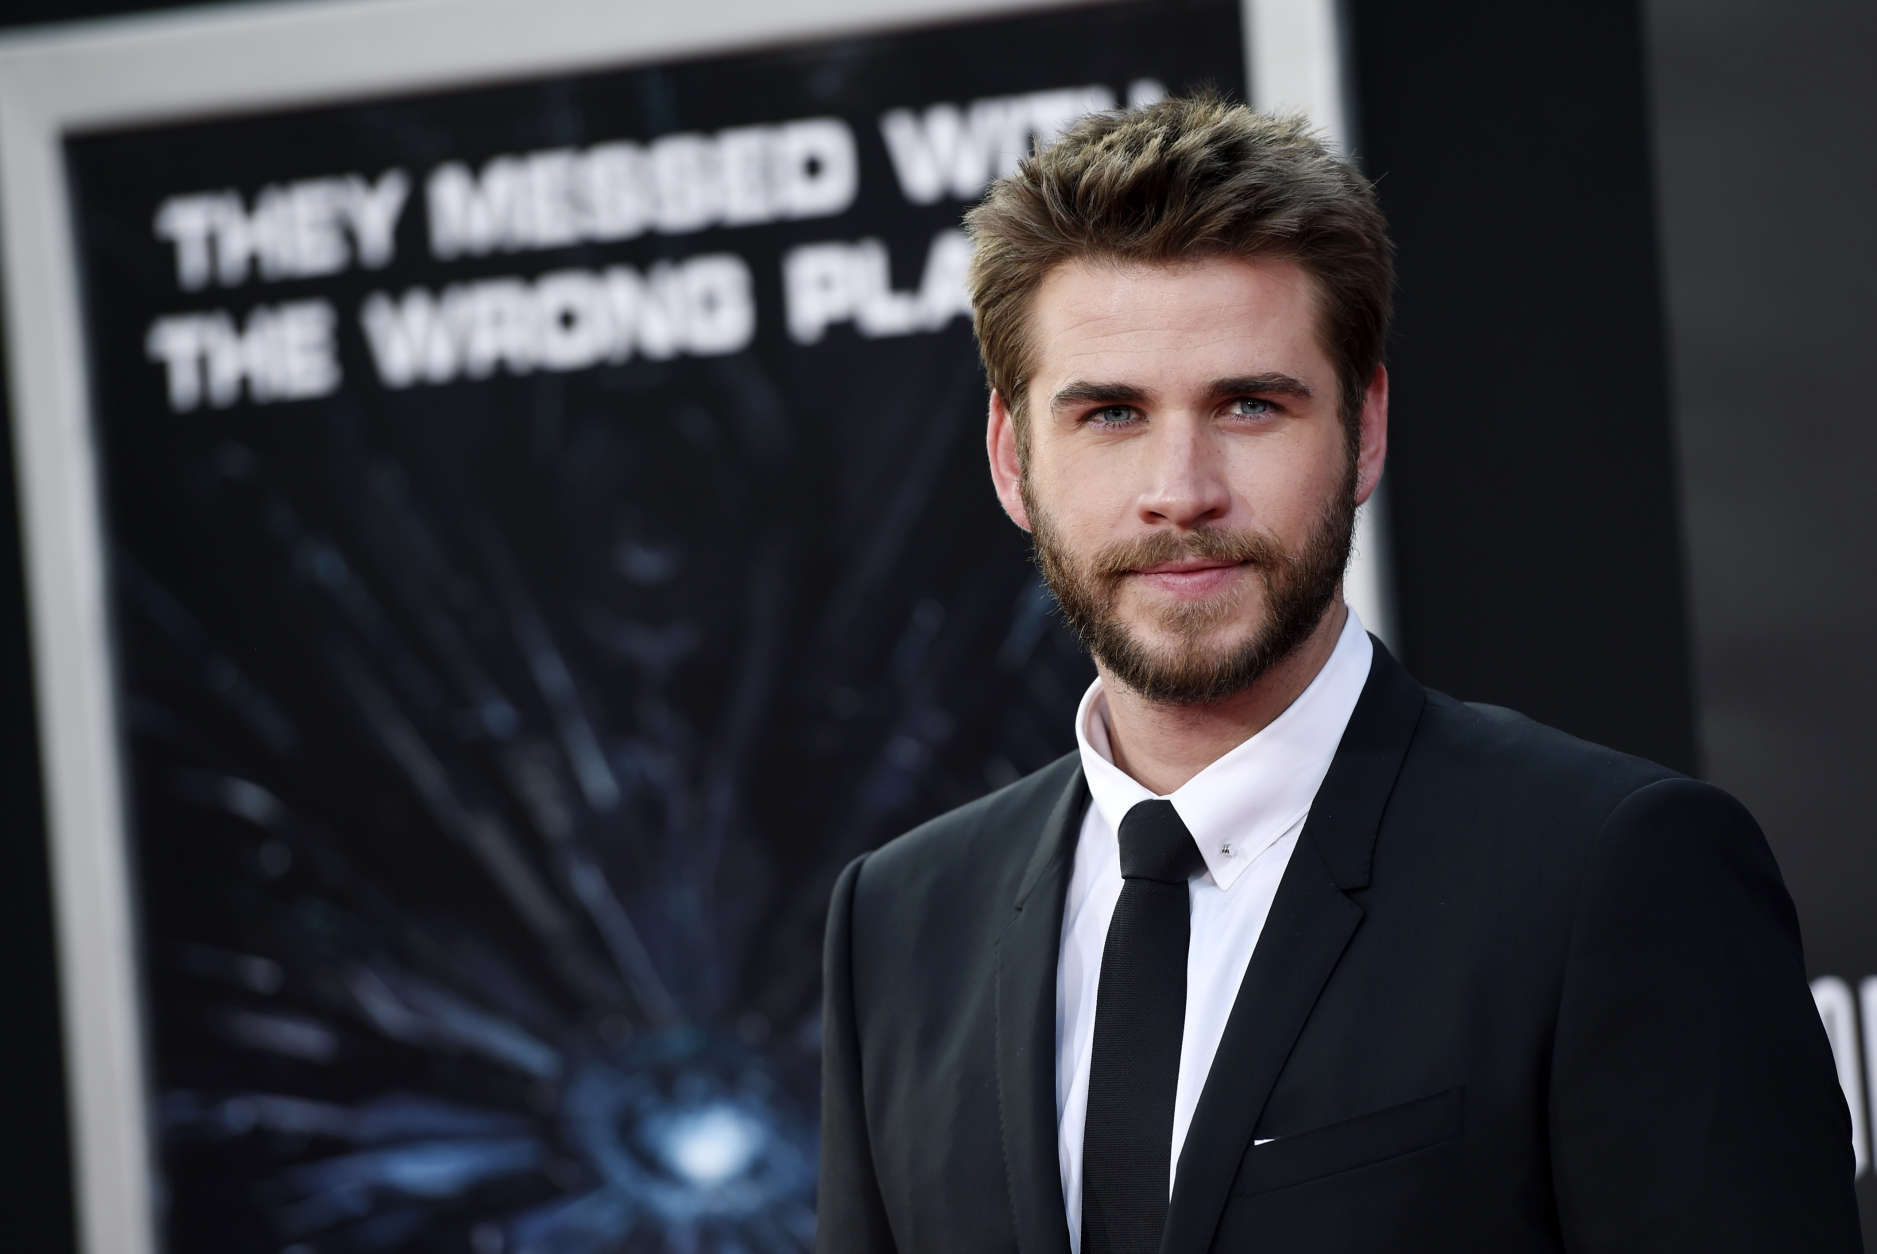 Liam Hemsworth, a cast member in "Independence Day: Resurgence," poses at the premiere of the film at the TCL Chinese Theatre on Monday, June 20, 2016, in Los Angeles. (Photo by Chris Pizzello/Invision/AP)